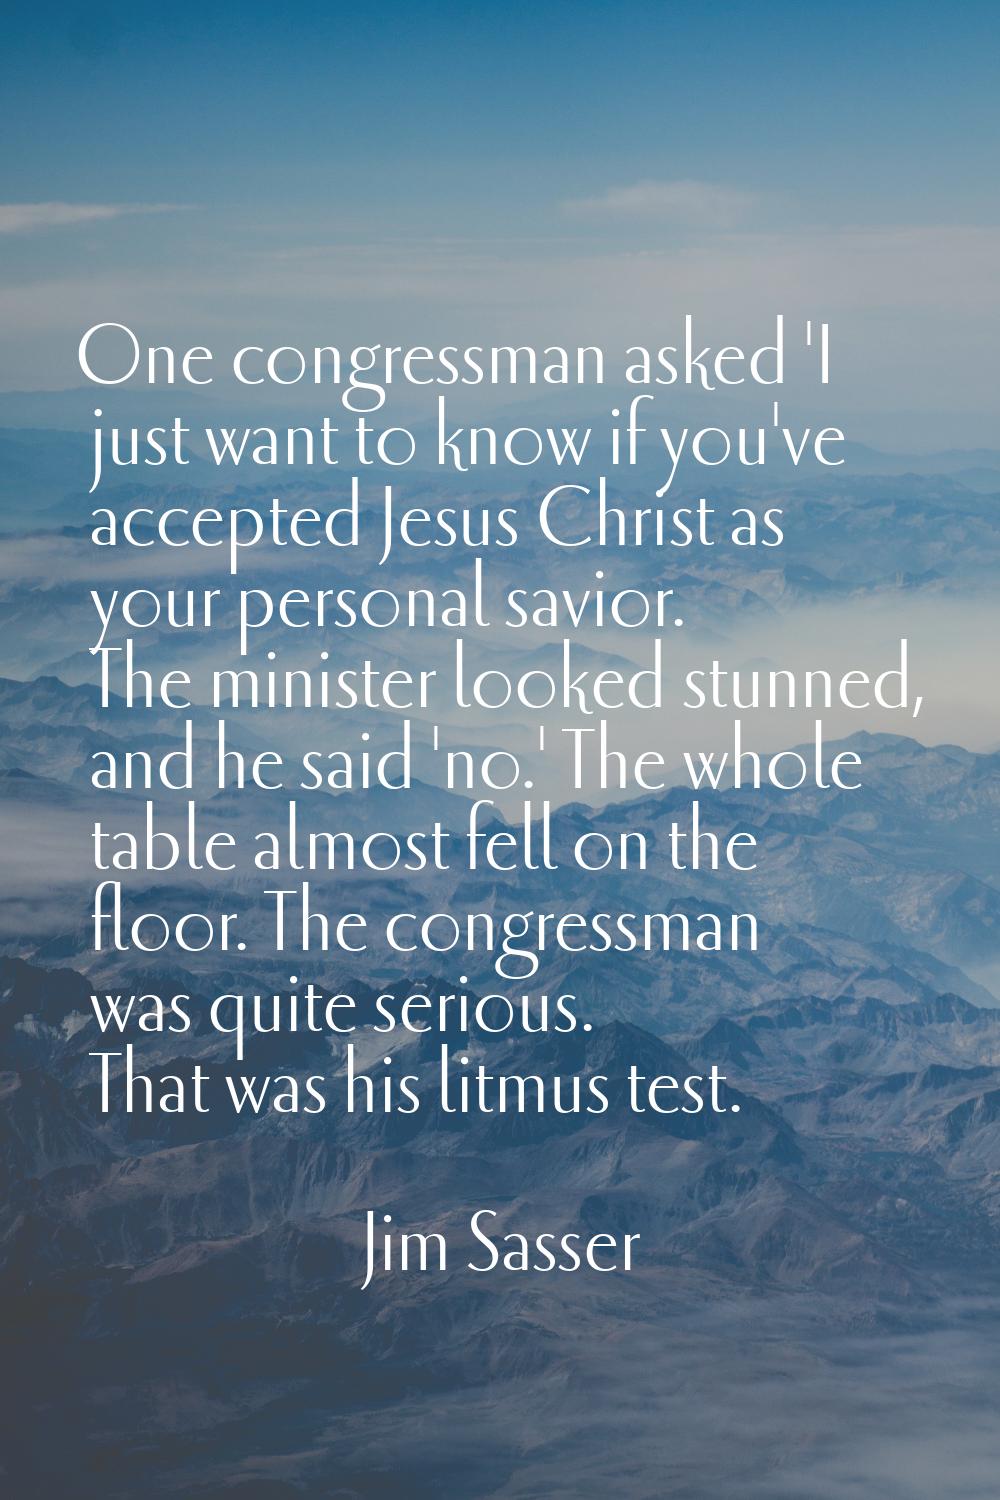 One congressman asked 'I just want to know if you've accepted Jesus Christ as your personal savior.